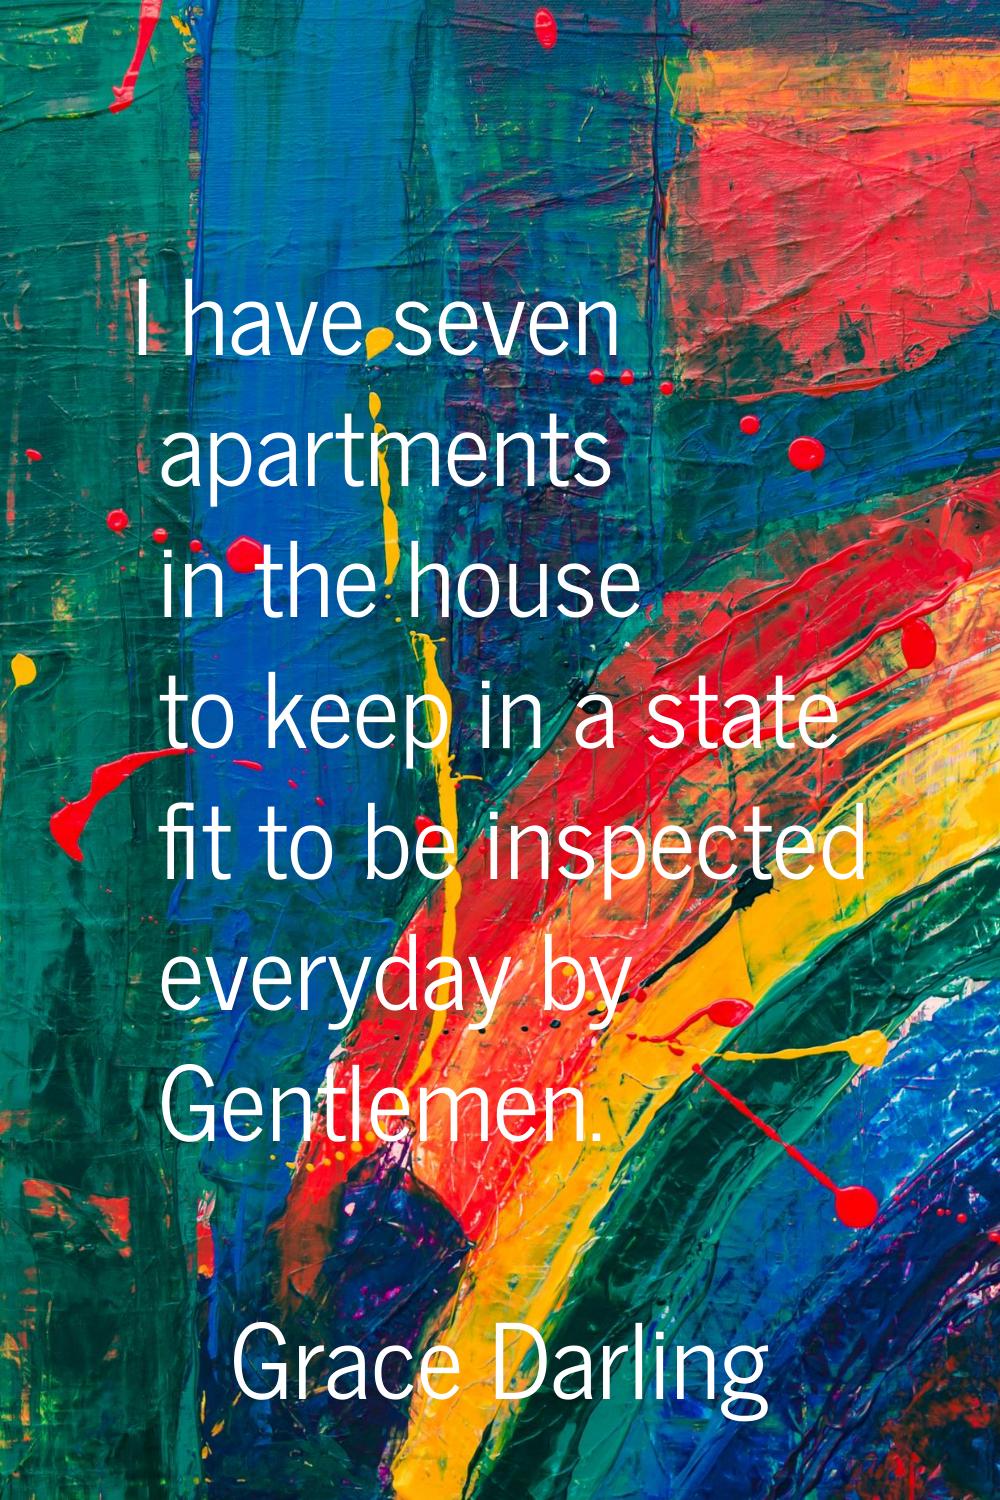 I have seven apartments in the house to keep in a state fit to be inspected everyday by Gentlemen.